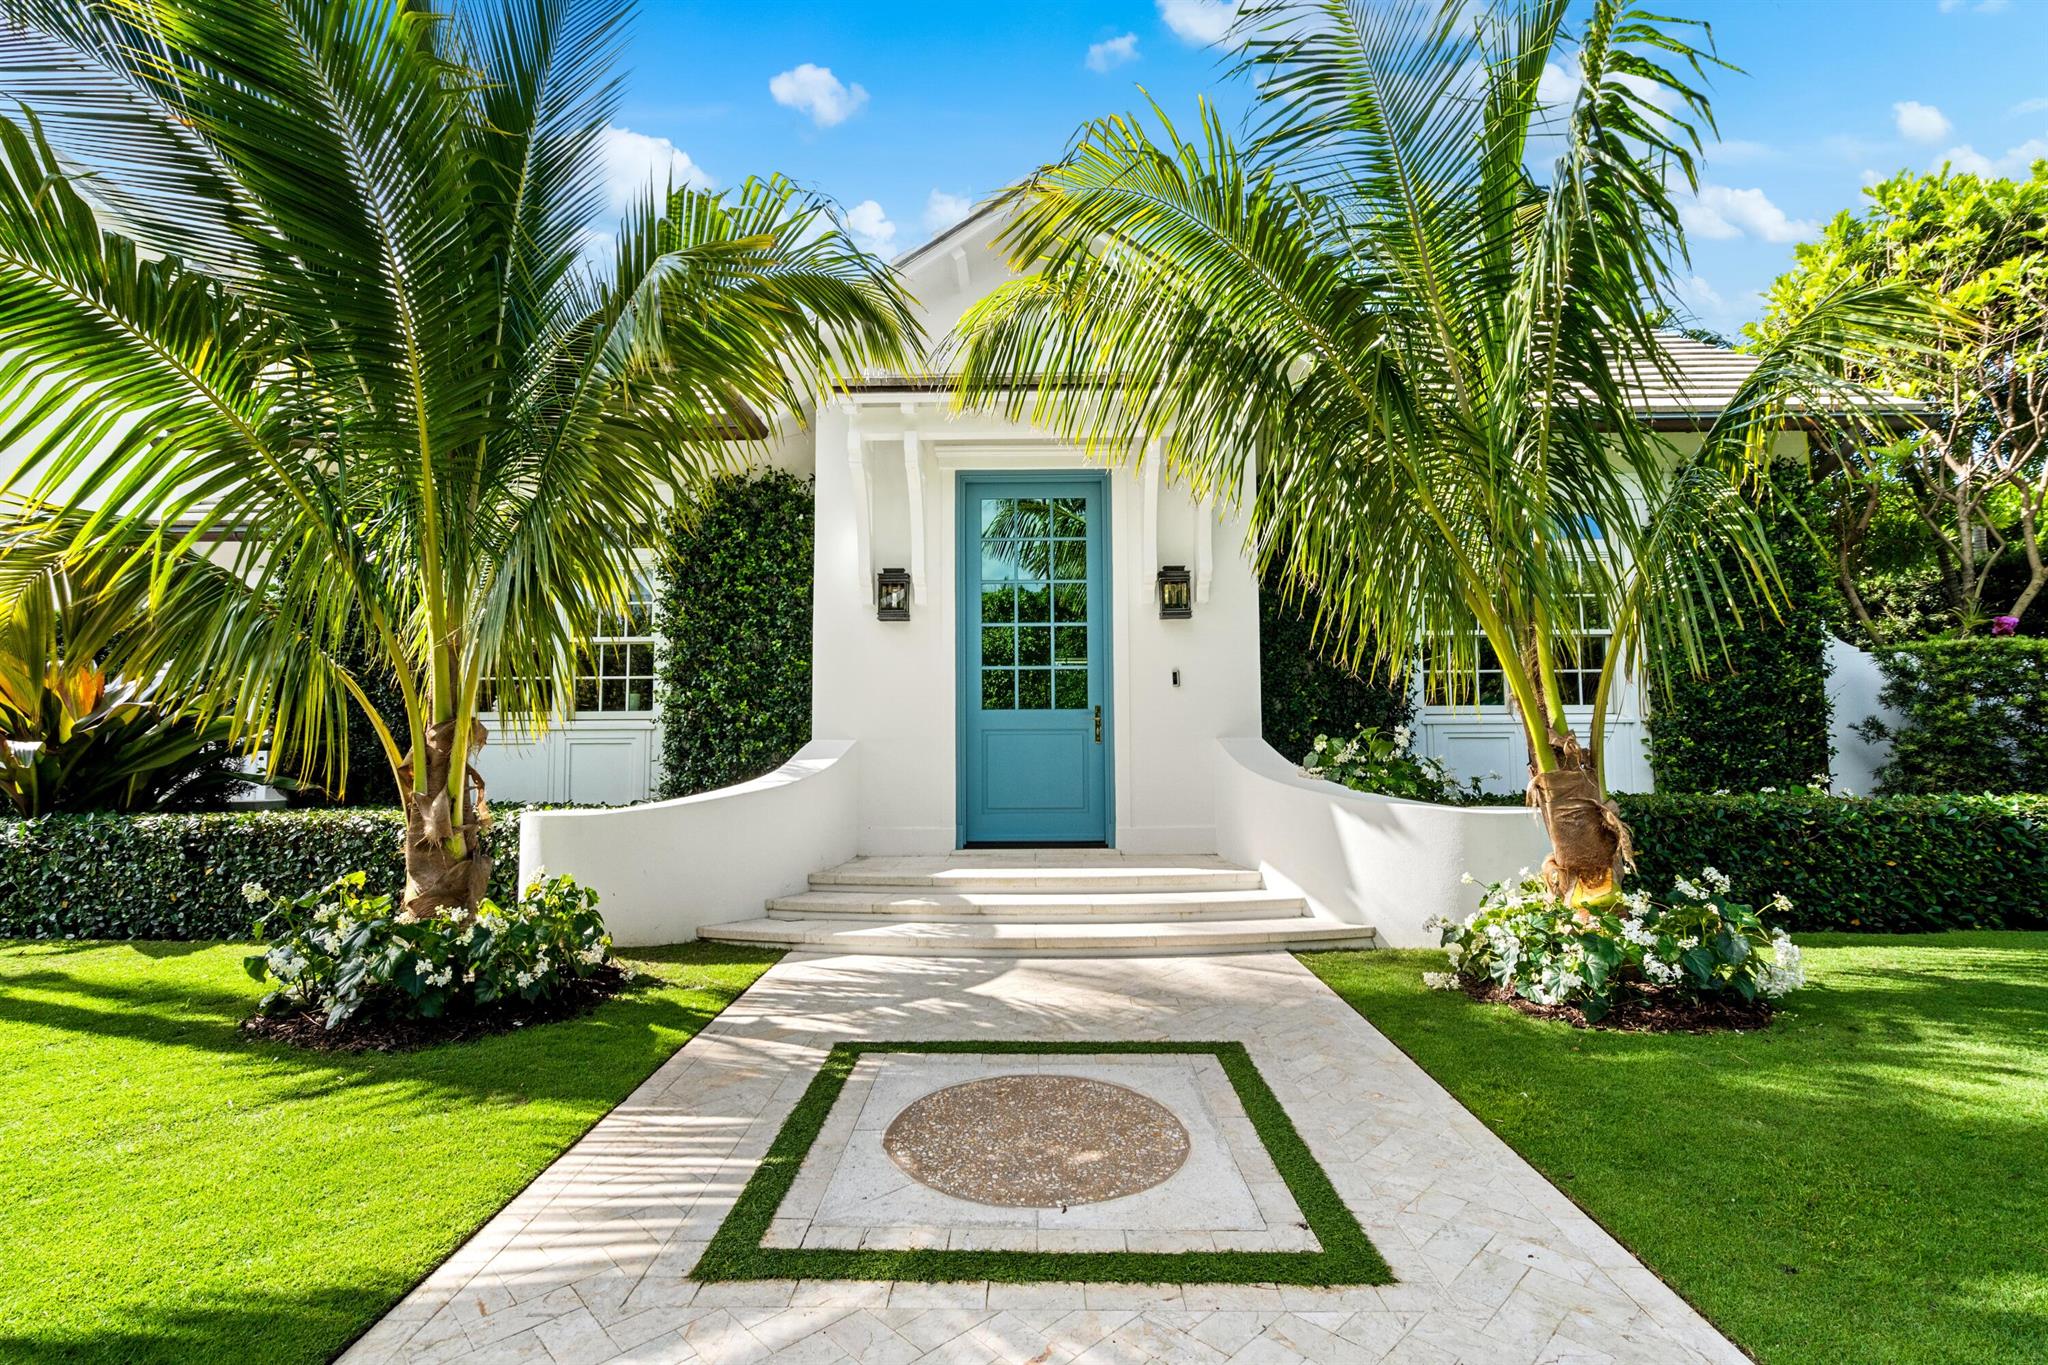 House for Sale in Palm Beach, FL